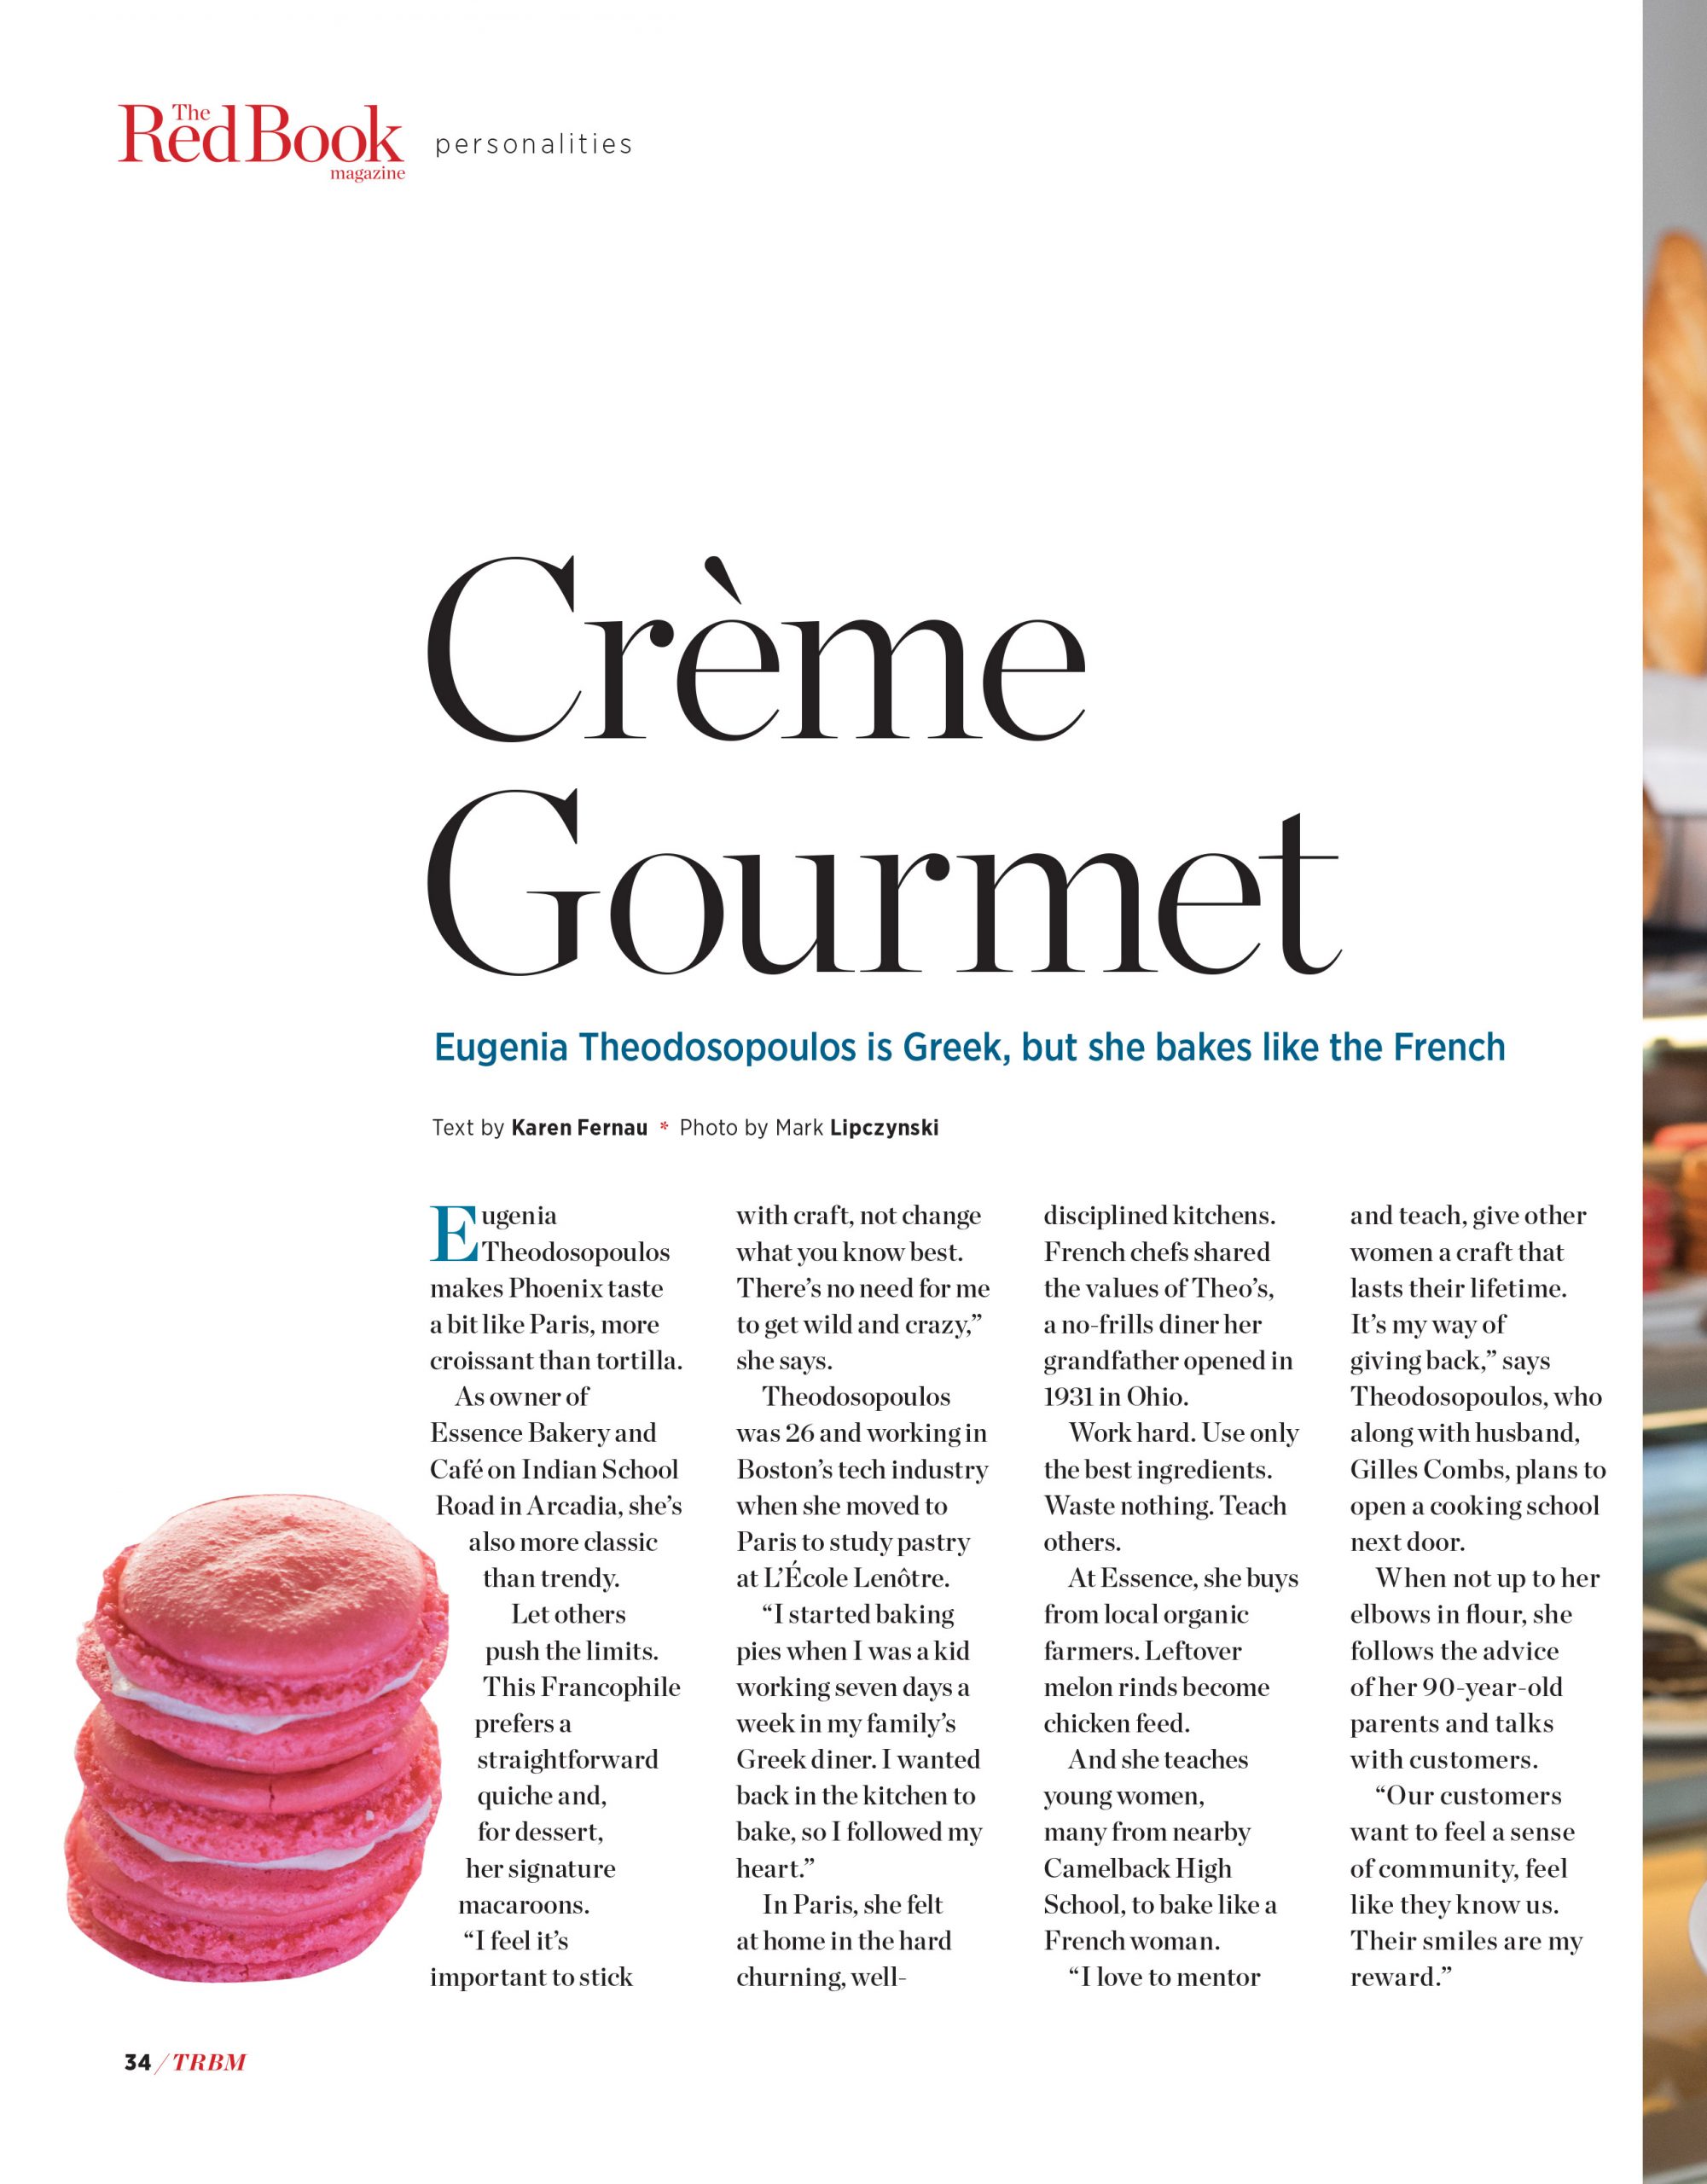 The-Red-Book-Creme-Gourmet